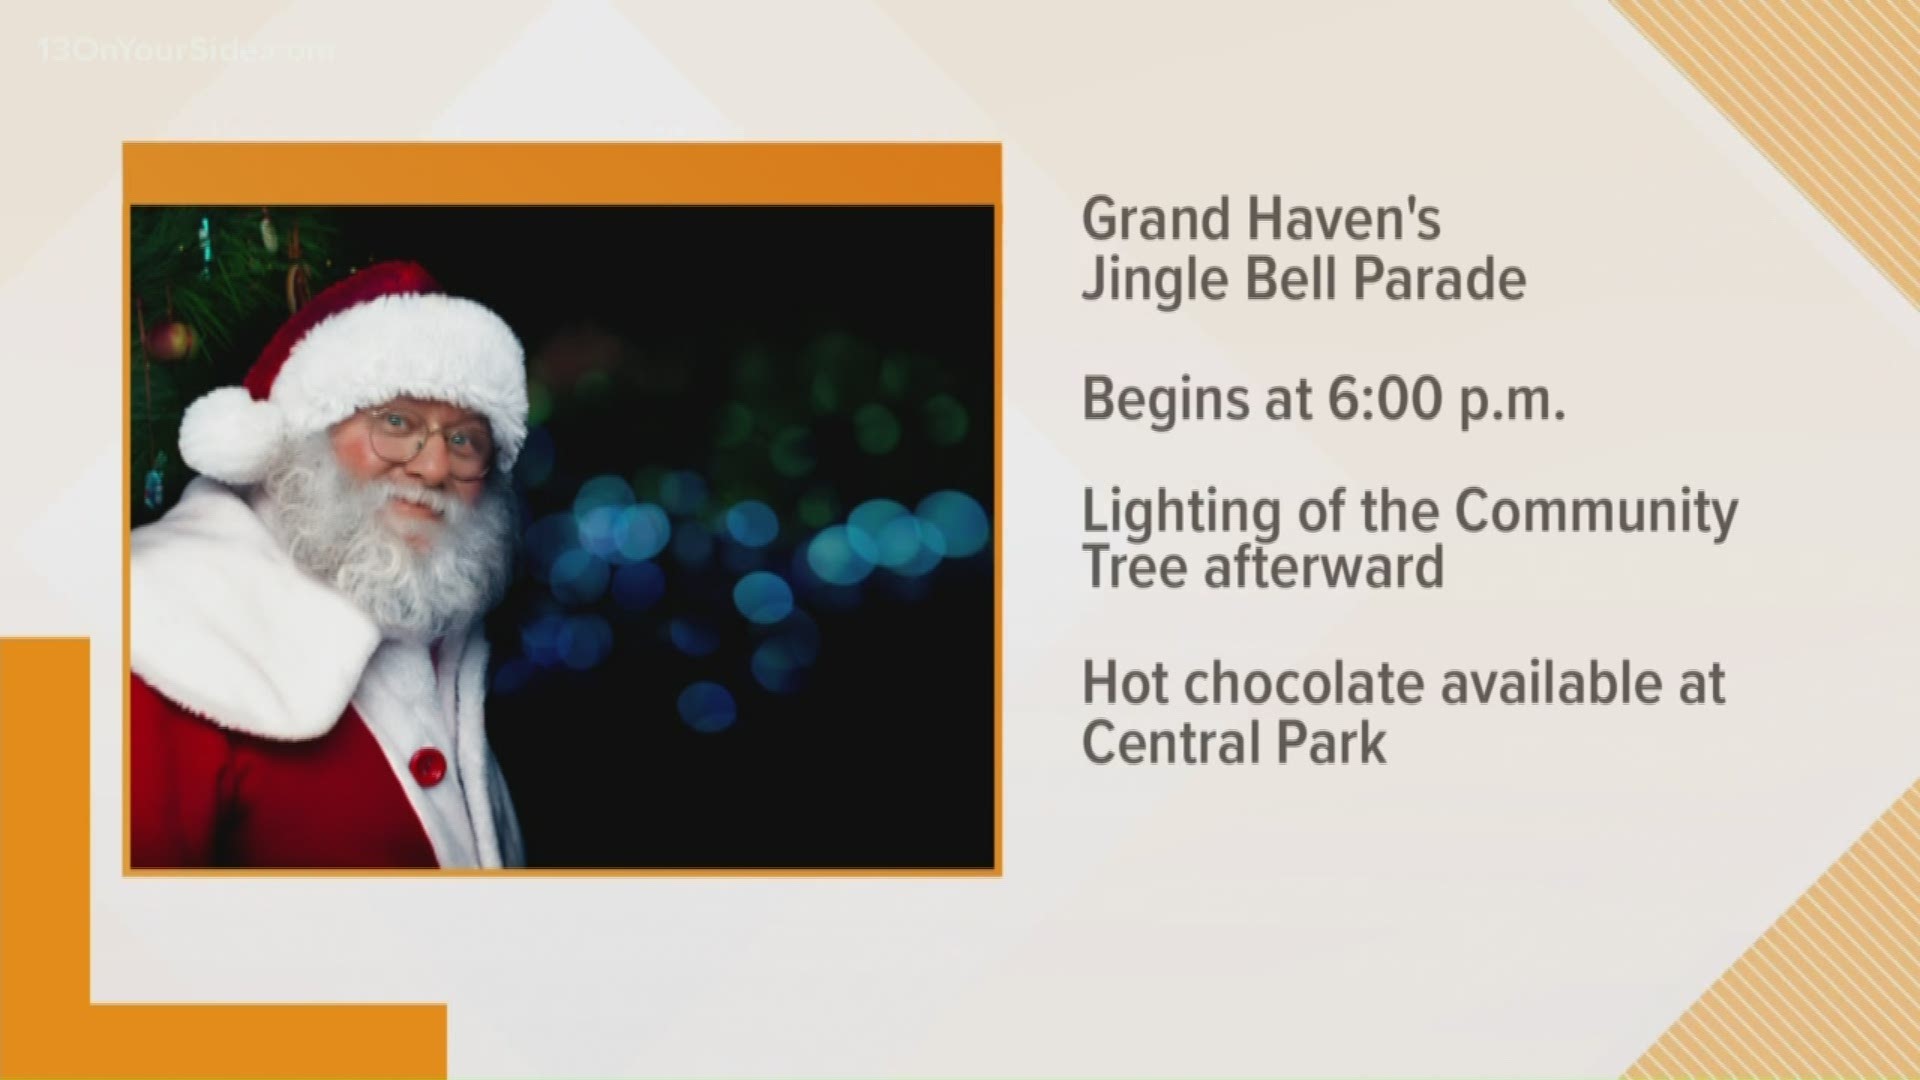 Santa will be paying Grand Haven a visit Saturday. The Jingle Bell parade starts at 6 p.m. There will be a tree lighting and hot chocolate as well!